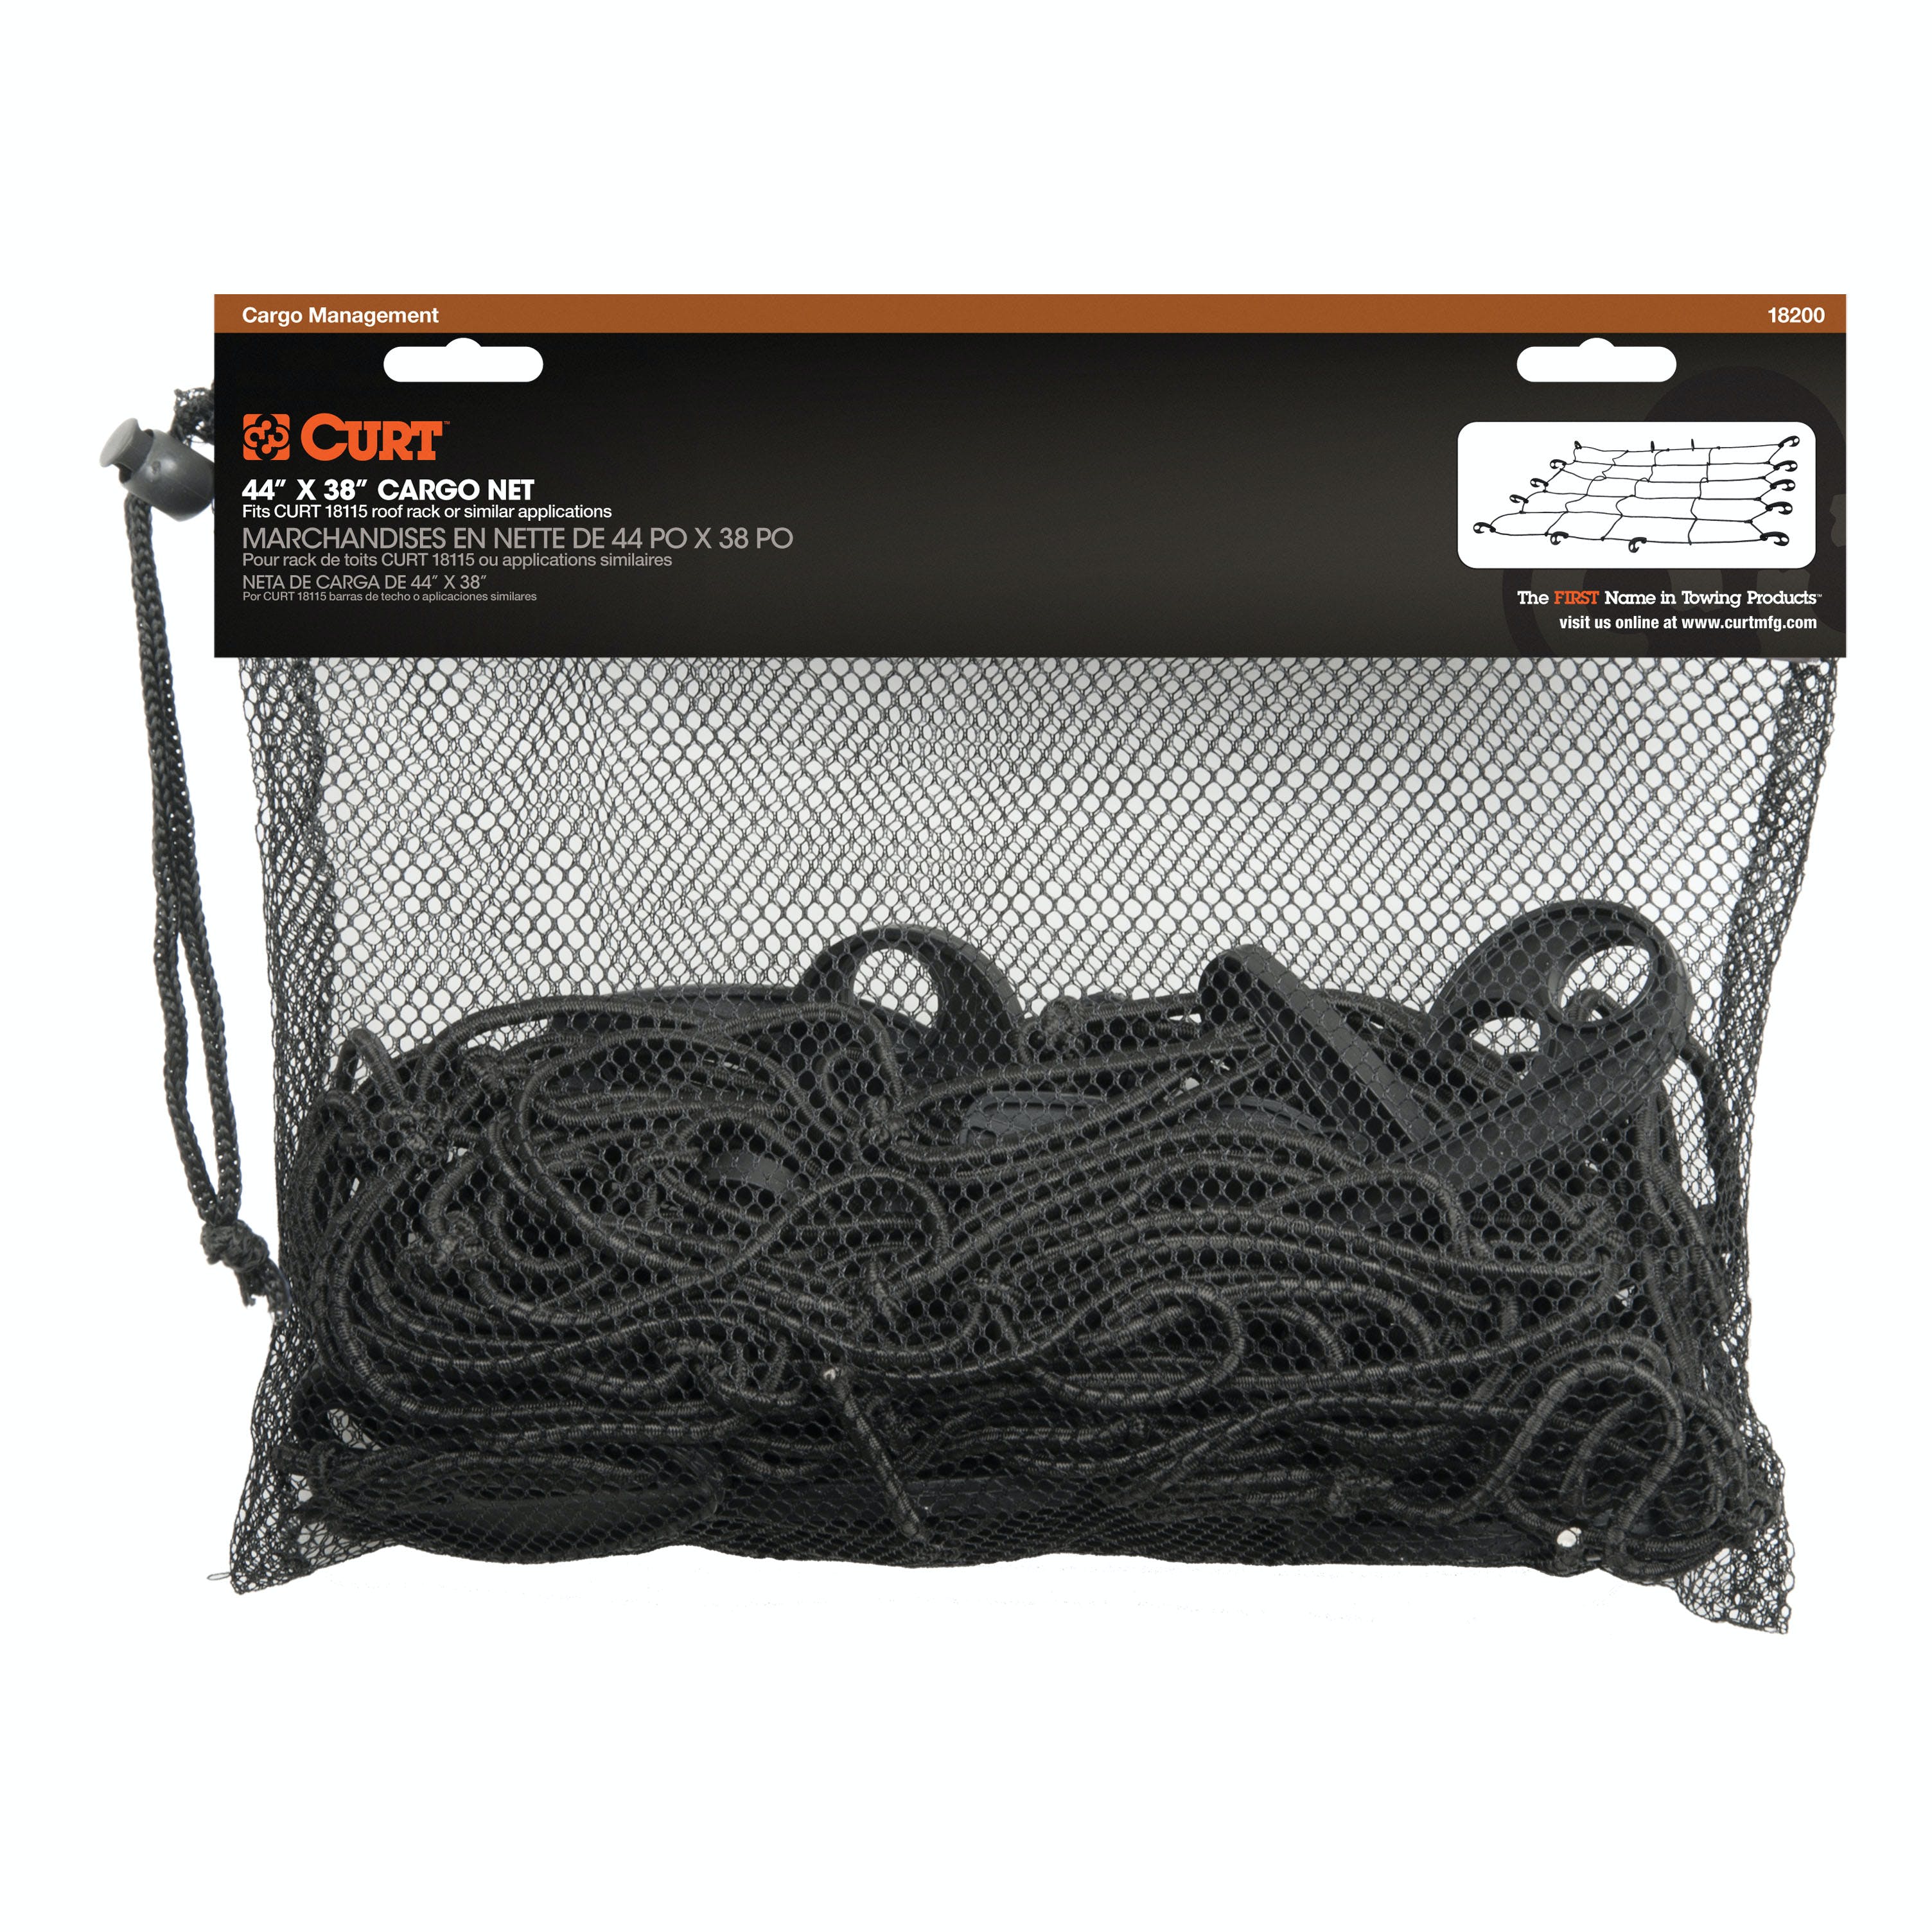 CURT 18200 44 x 38 Elastic Cargo Net for Roof Basket